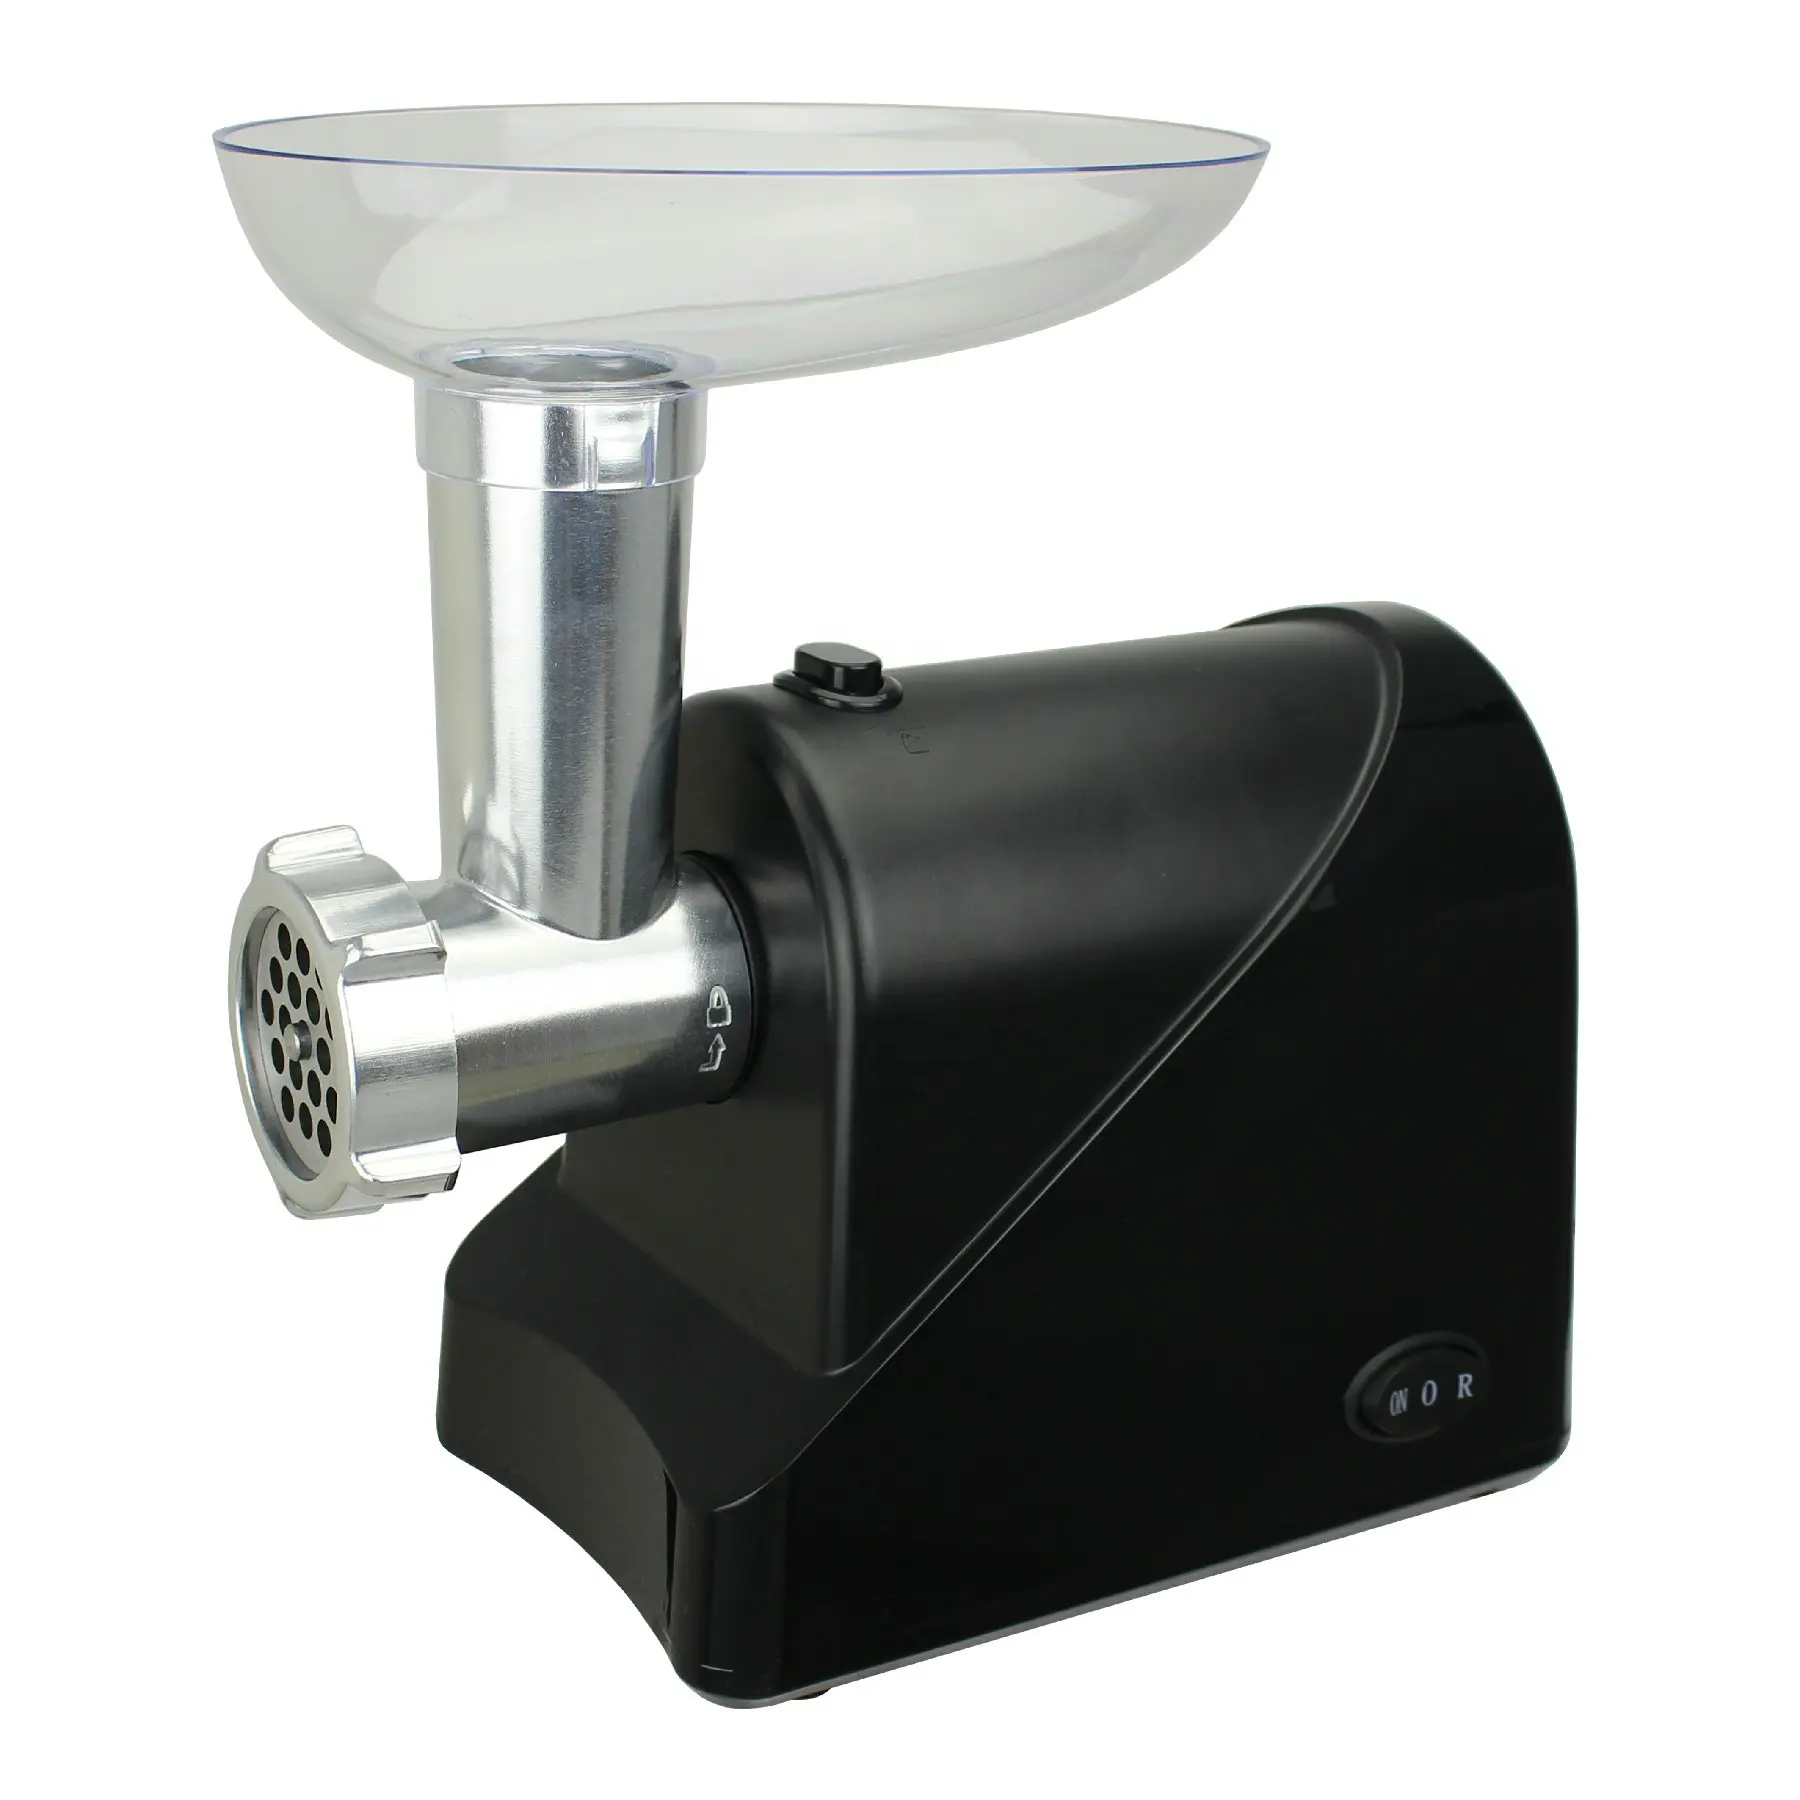 2024 High performance meat grinder for household used, 300W power motor, plastic casing with grinding accessories